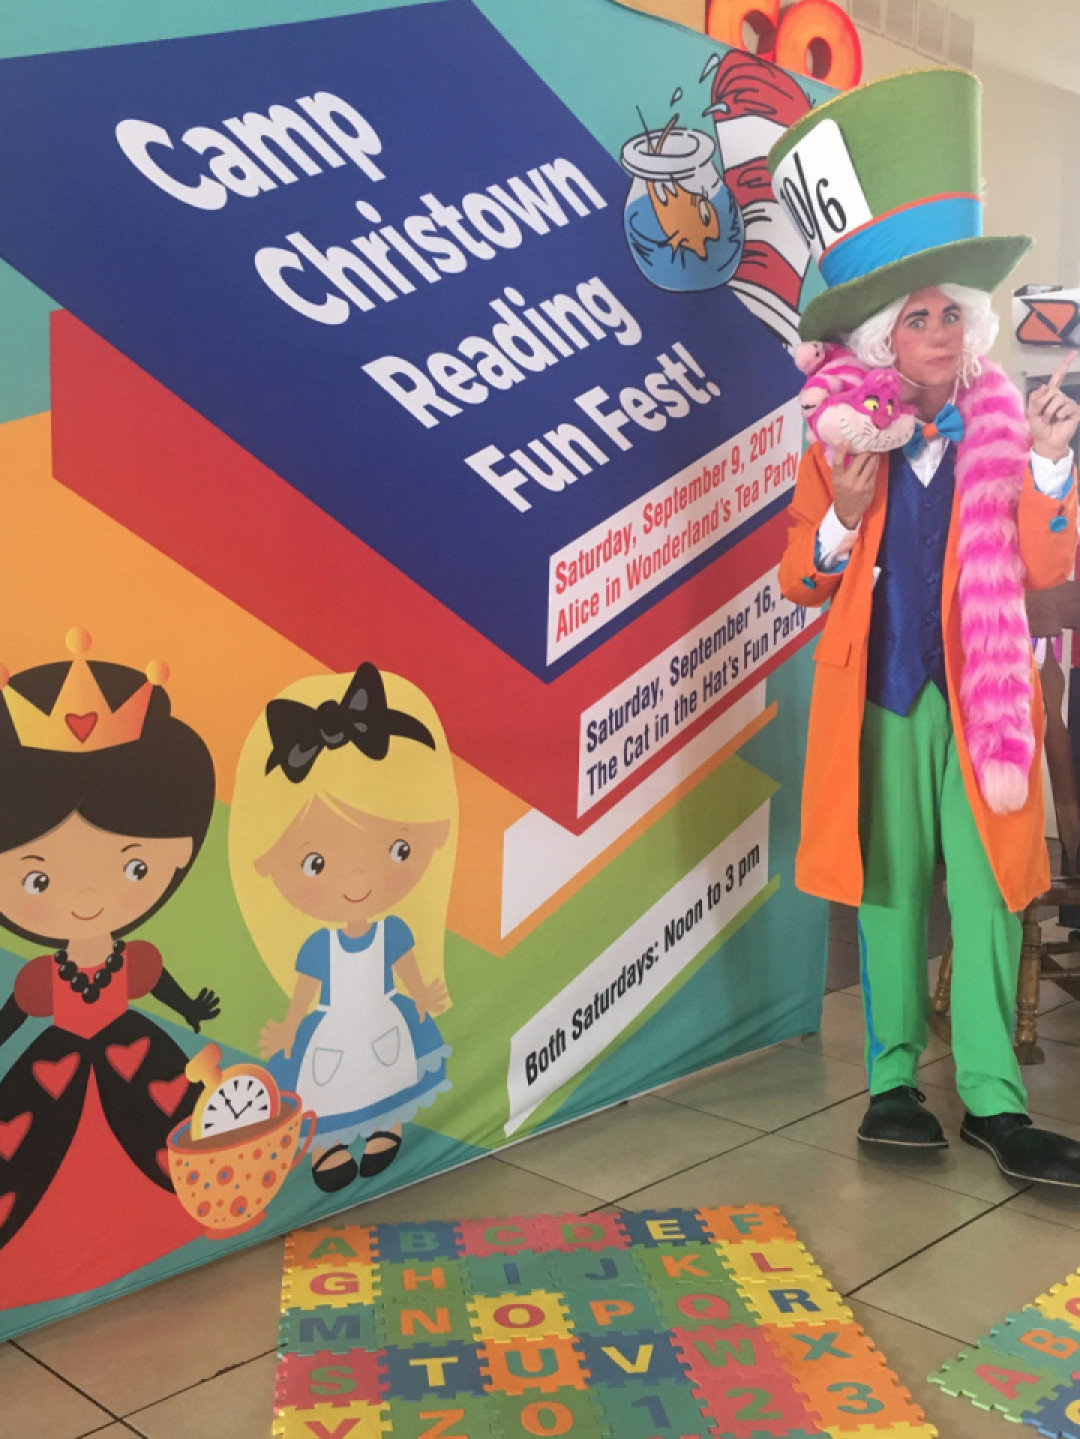 Family-Friendly, Free Camp Christown Reading Fun Fest from Noon – 3 p.m. on Saturday, Sept. 14 and Saturday, Sept. 21 at Christown Spectrum Shopping 